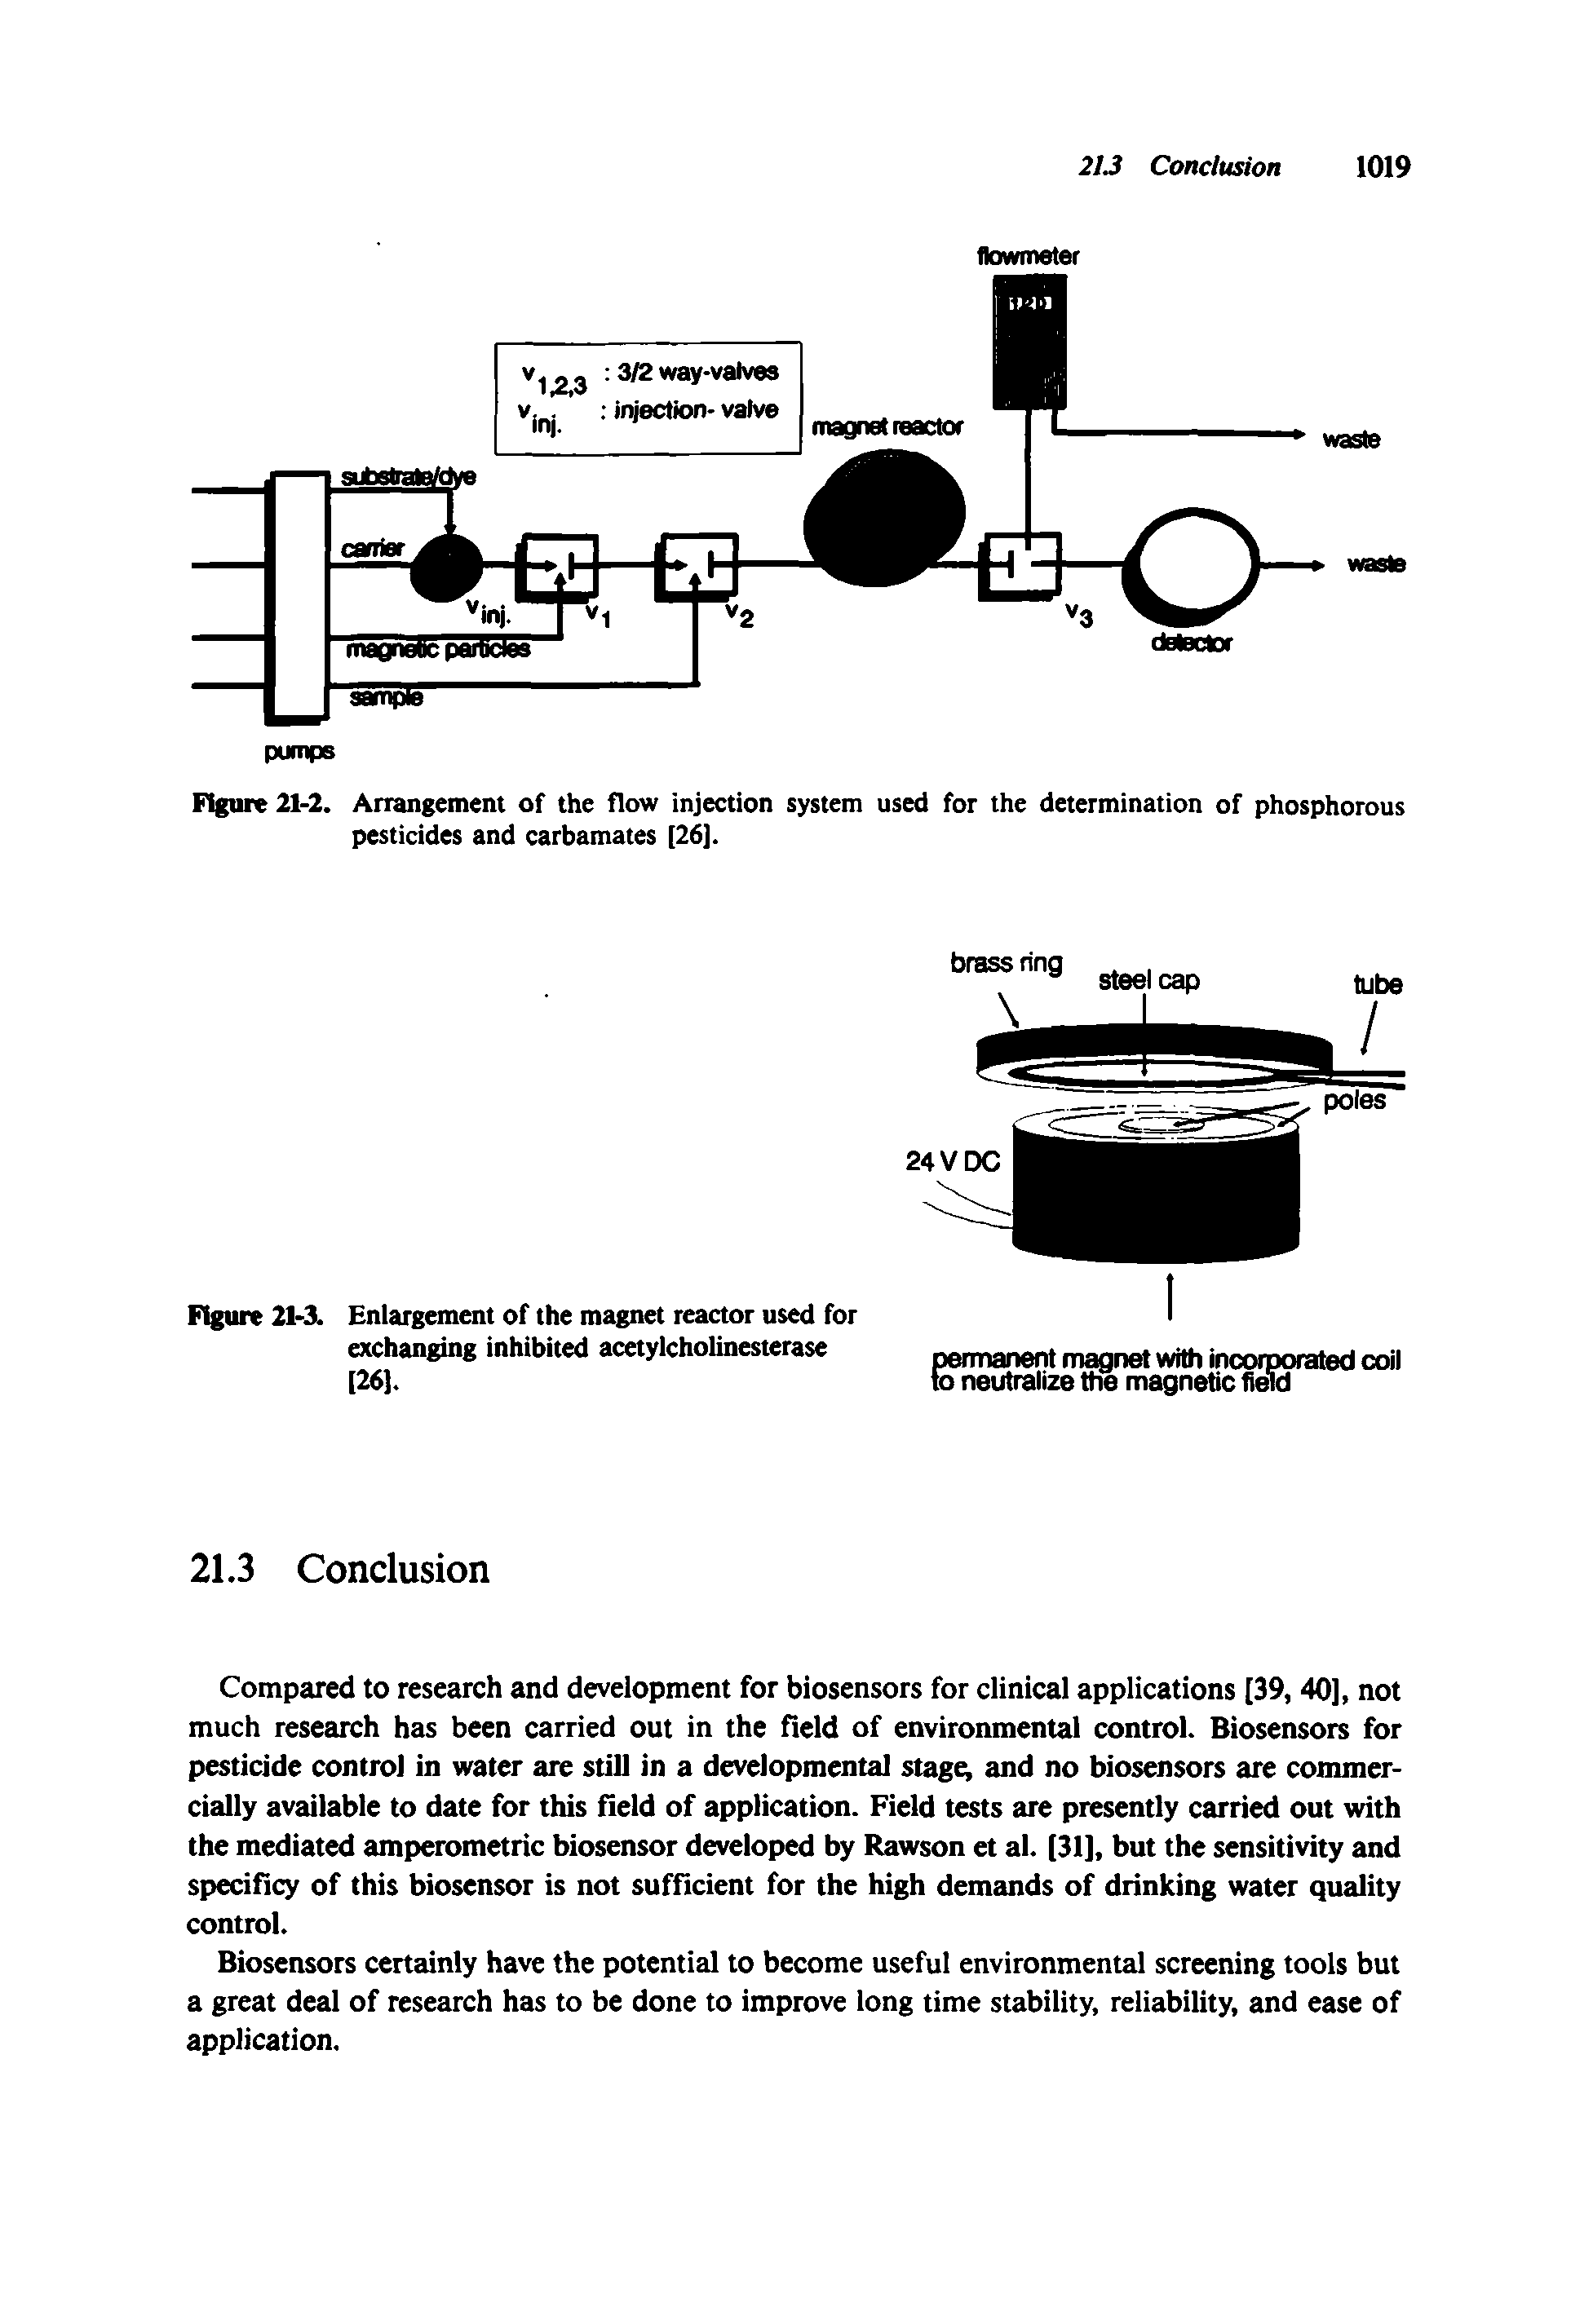 Figure 21-2. Arrangement of the flow injection system used for the determination of phosphorous pesticides and carbamates [26].